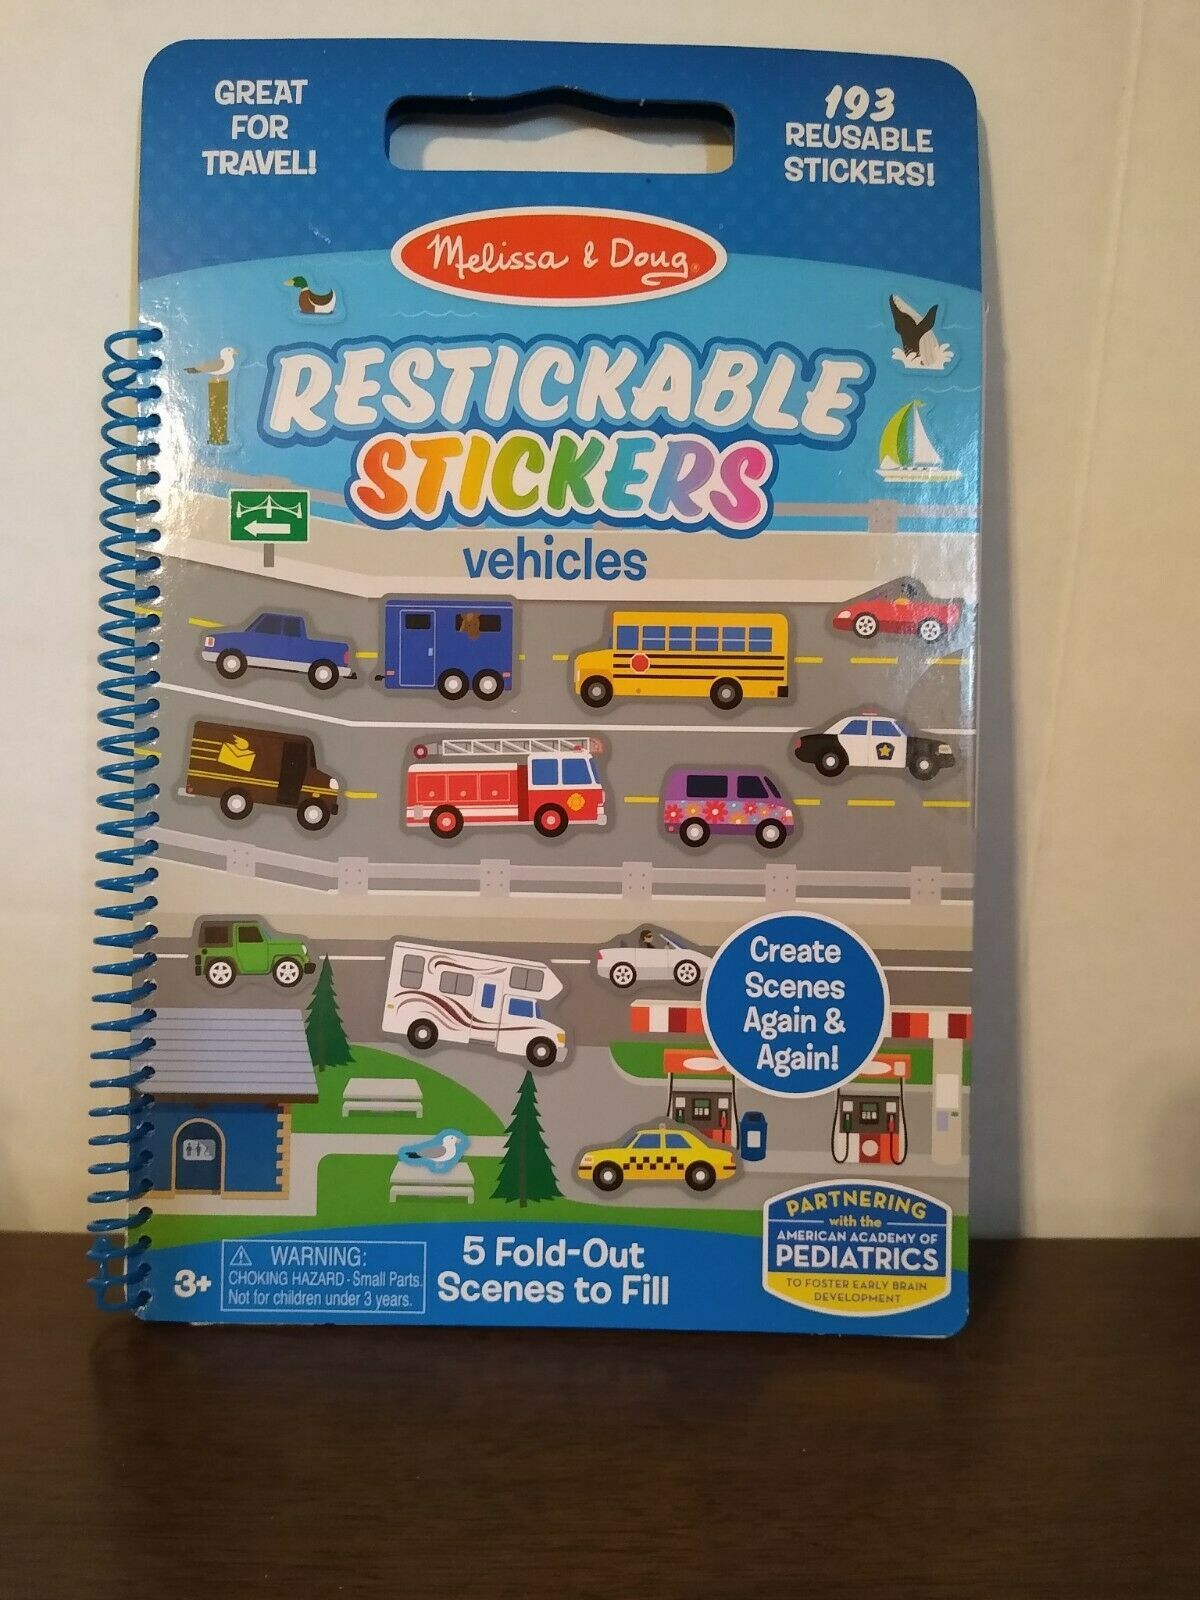 Melissa & Doug Restickable Stickers - Vehicles - 5 fold out scenes 193 stickers